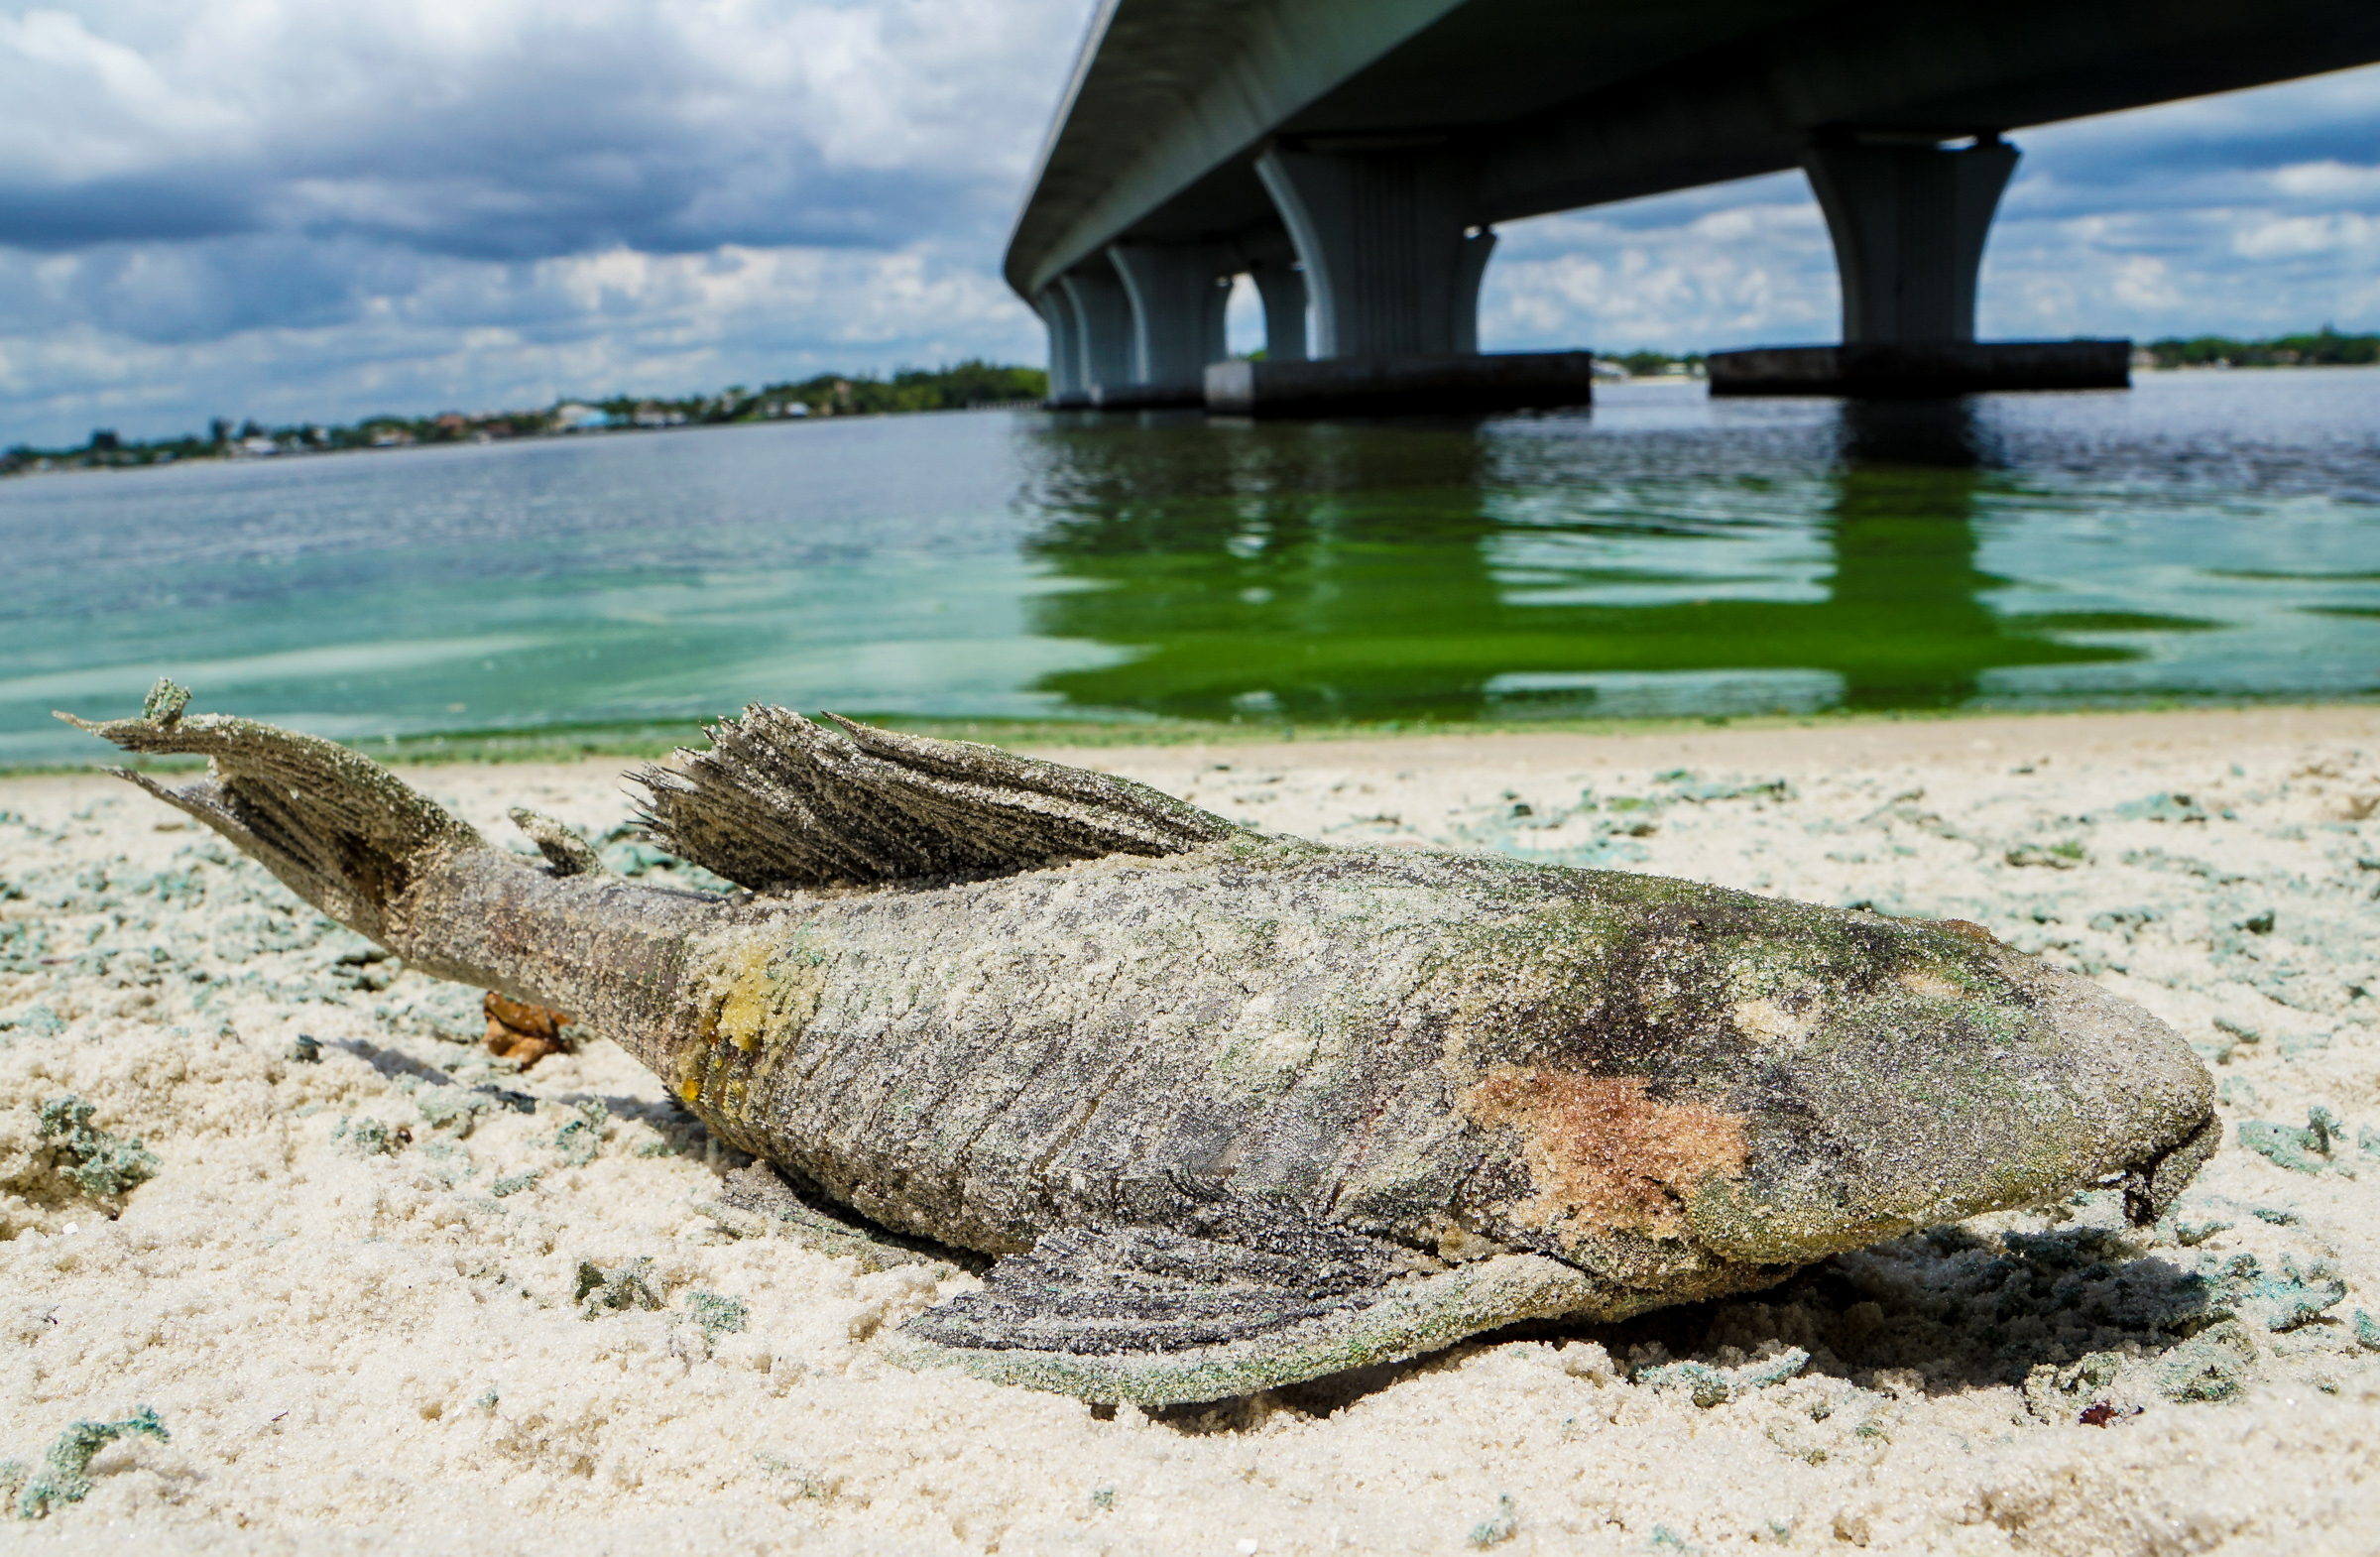 PHOTO: A dead walking catfish lays on the shore with algae along Sewell's Point, Florida, on the St. Lucie River under an Ocean Boulevard bridge on June 27, 2016.